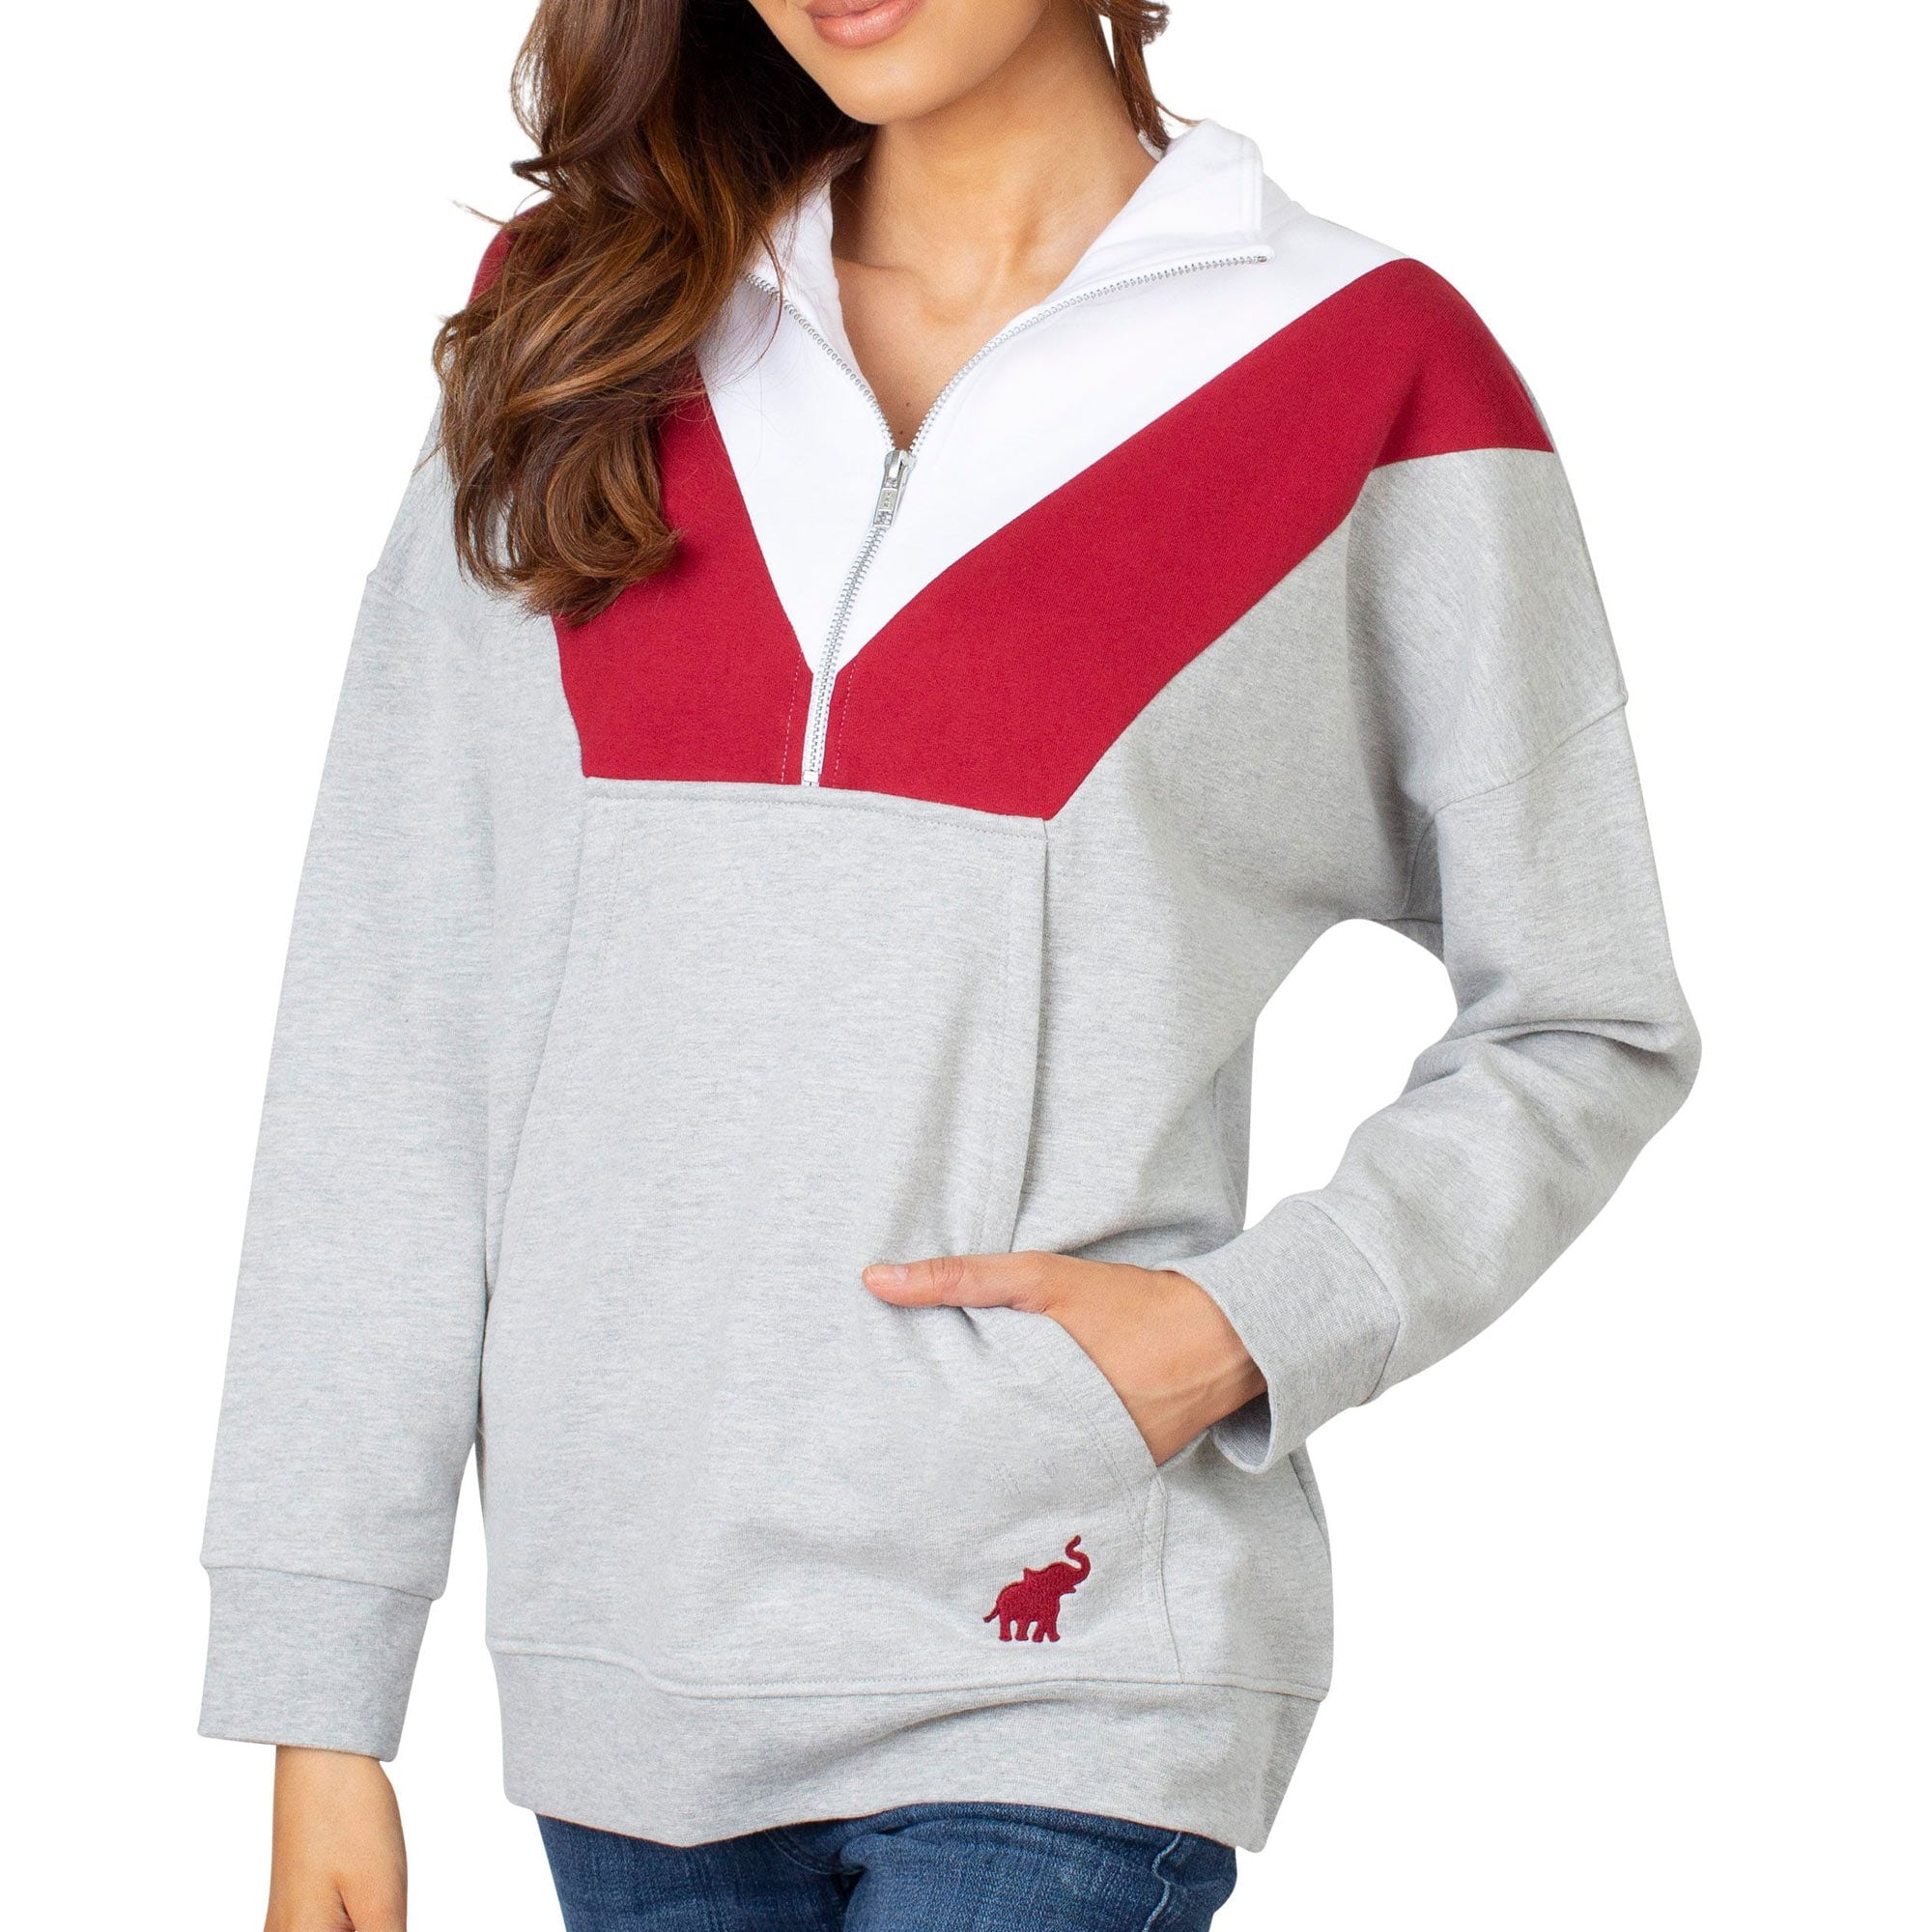 ALABAMA CRIMSON TIDE GIRL'S HIGH-LOW TUNIC SET RED & WHITE "A" OUTFIT COLLEGIATE 